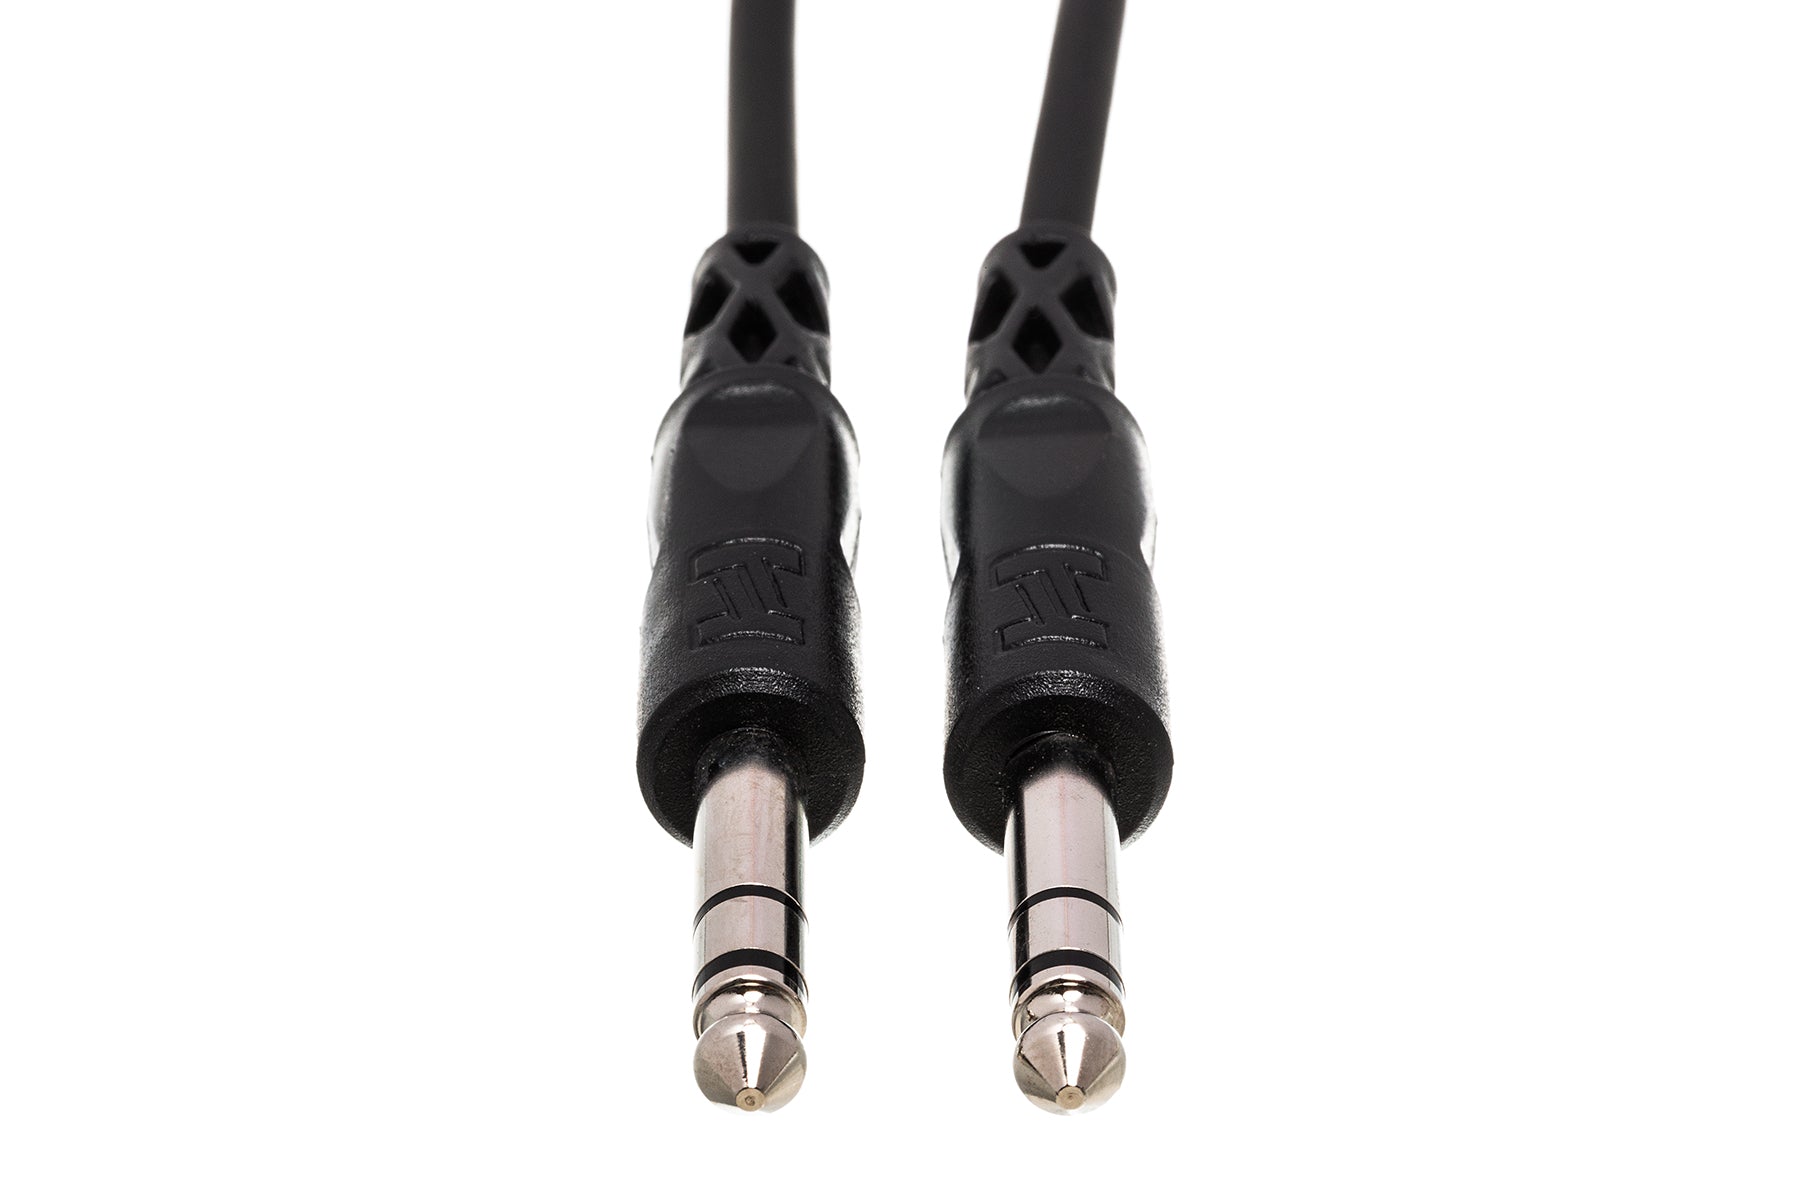 Hosa CSS-103 1/4 inch TRS to 1/4 inch TRS Balanced Interconnect Cable, 3 feet - Reco Music Malaysia